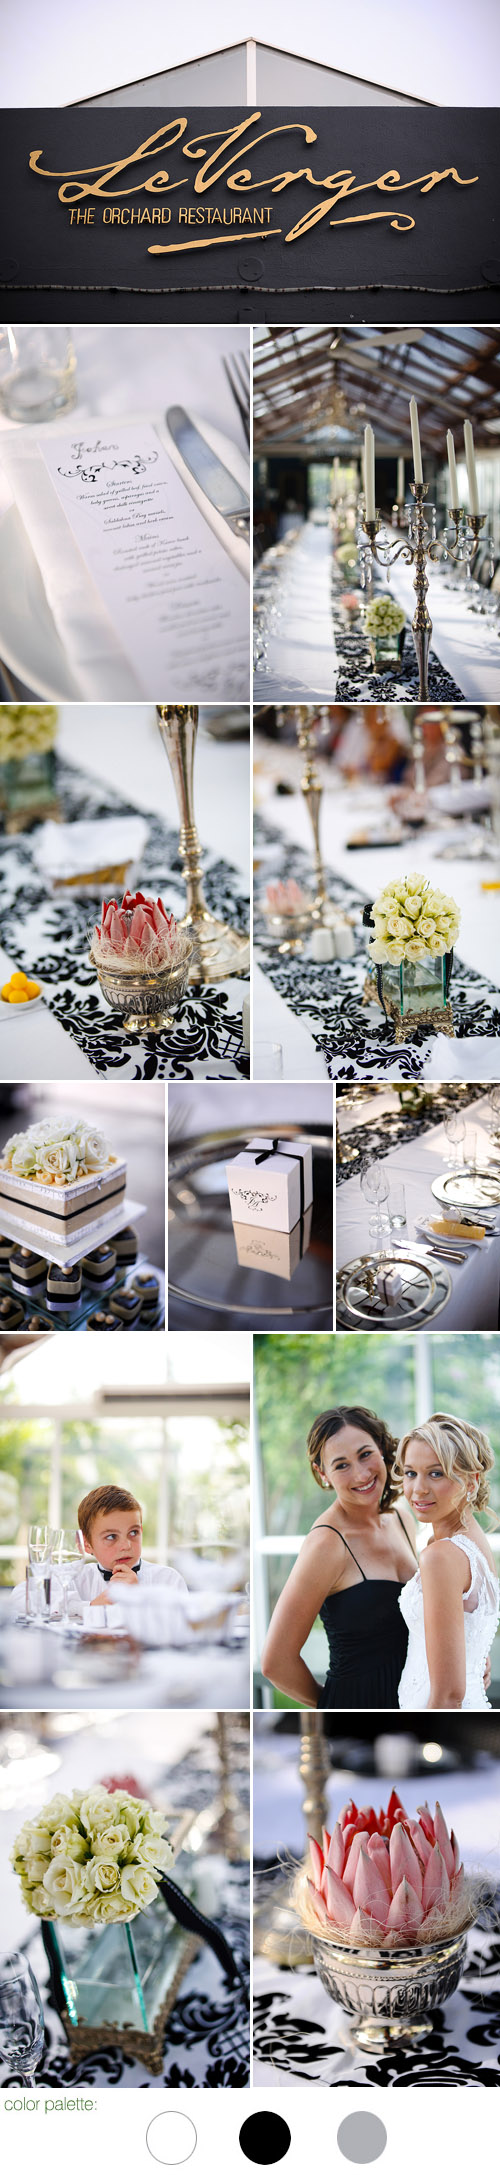 glamorous south african real wedding reception, black, white, gray and silver wedding color palette and wedding decor, images by Eric Uys